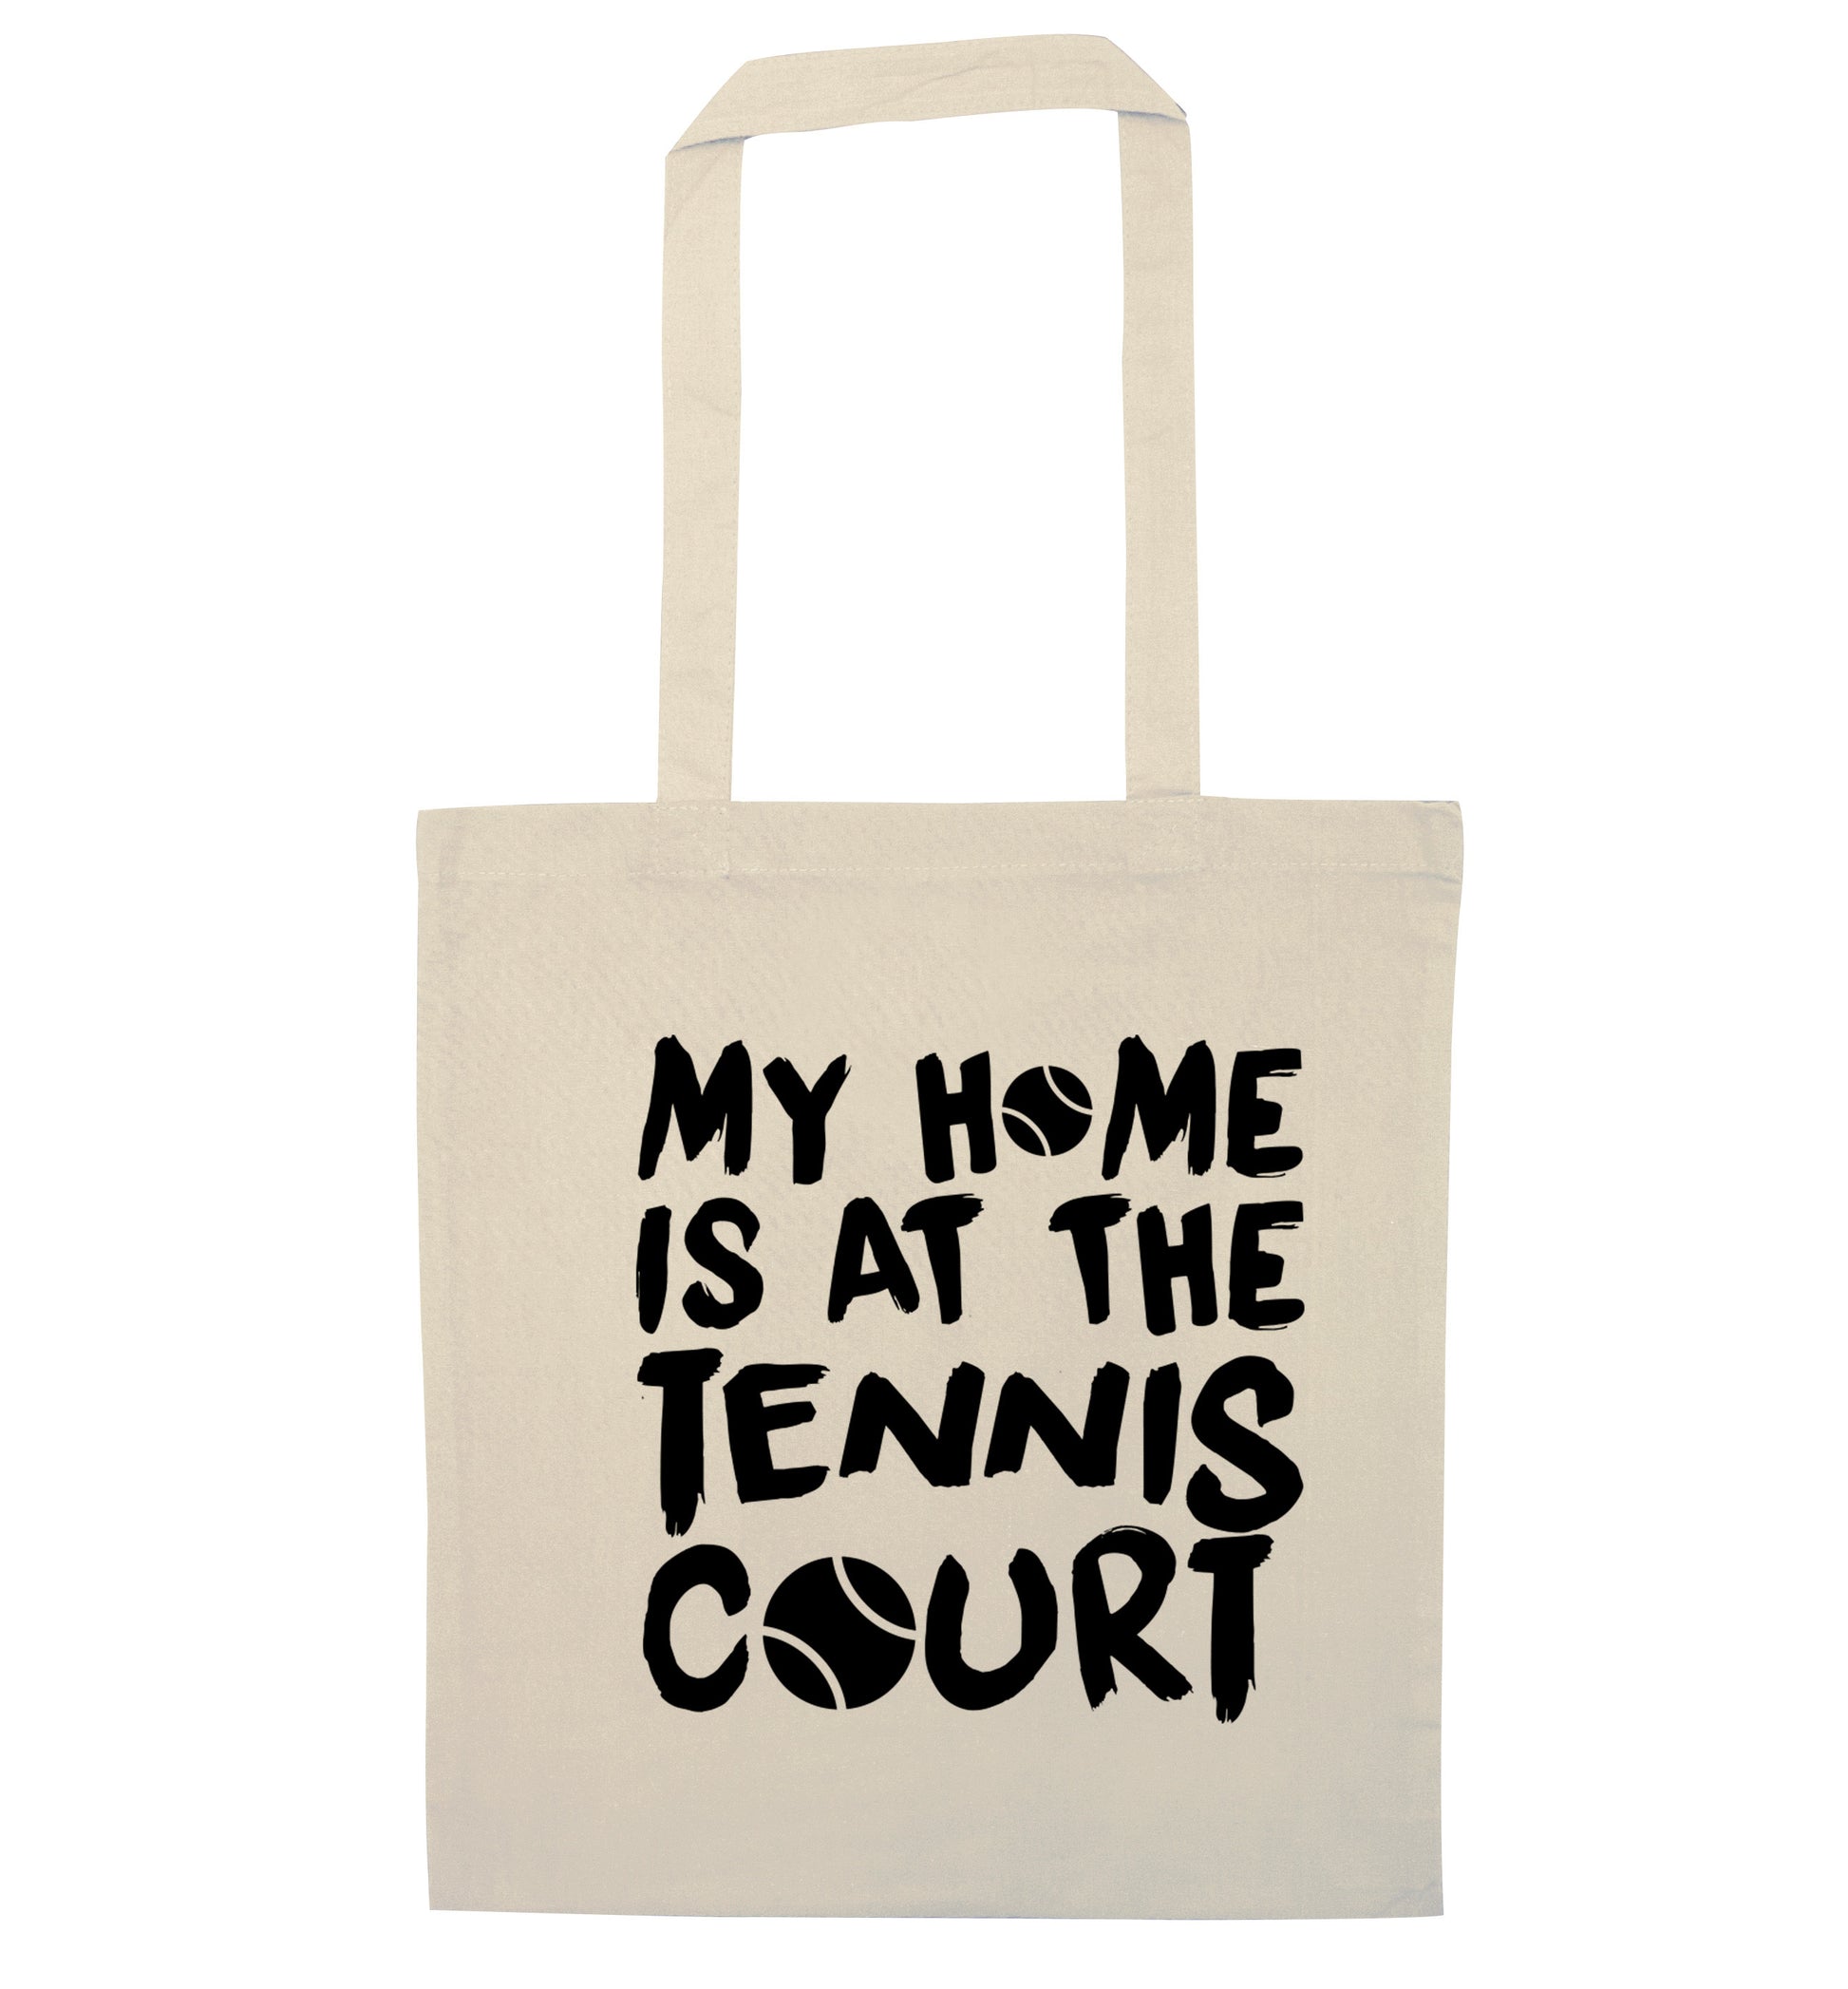 My home is at the tennis court natural tote bag